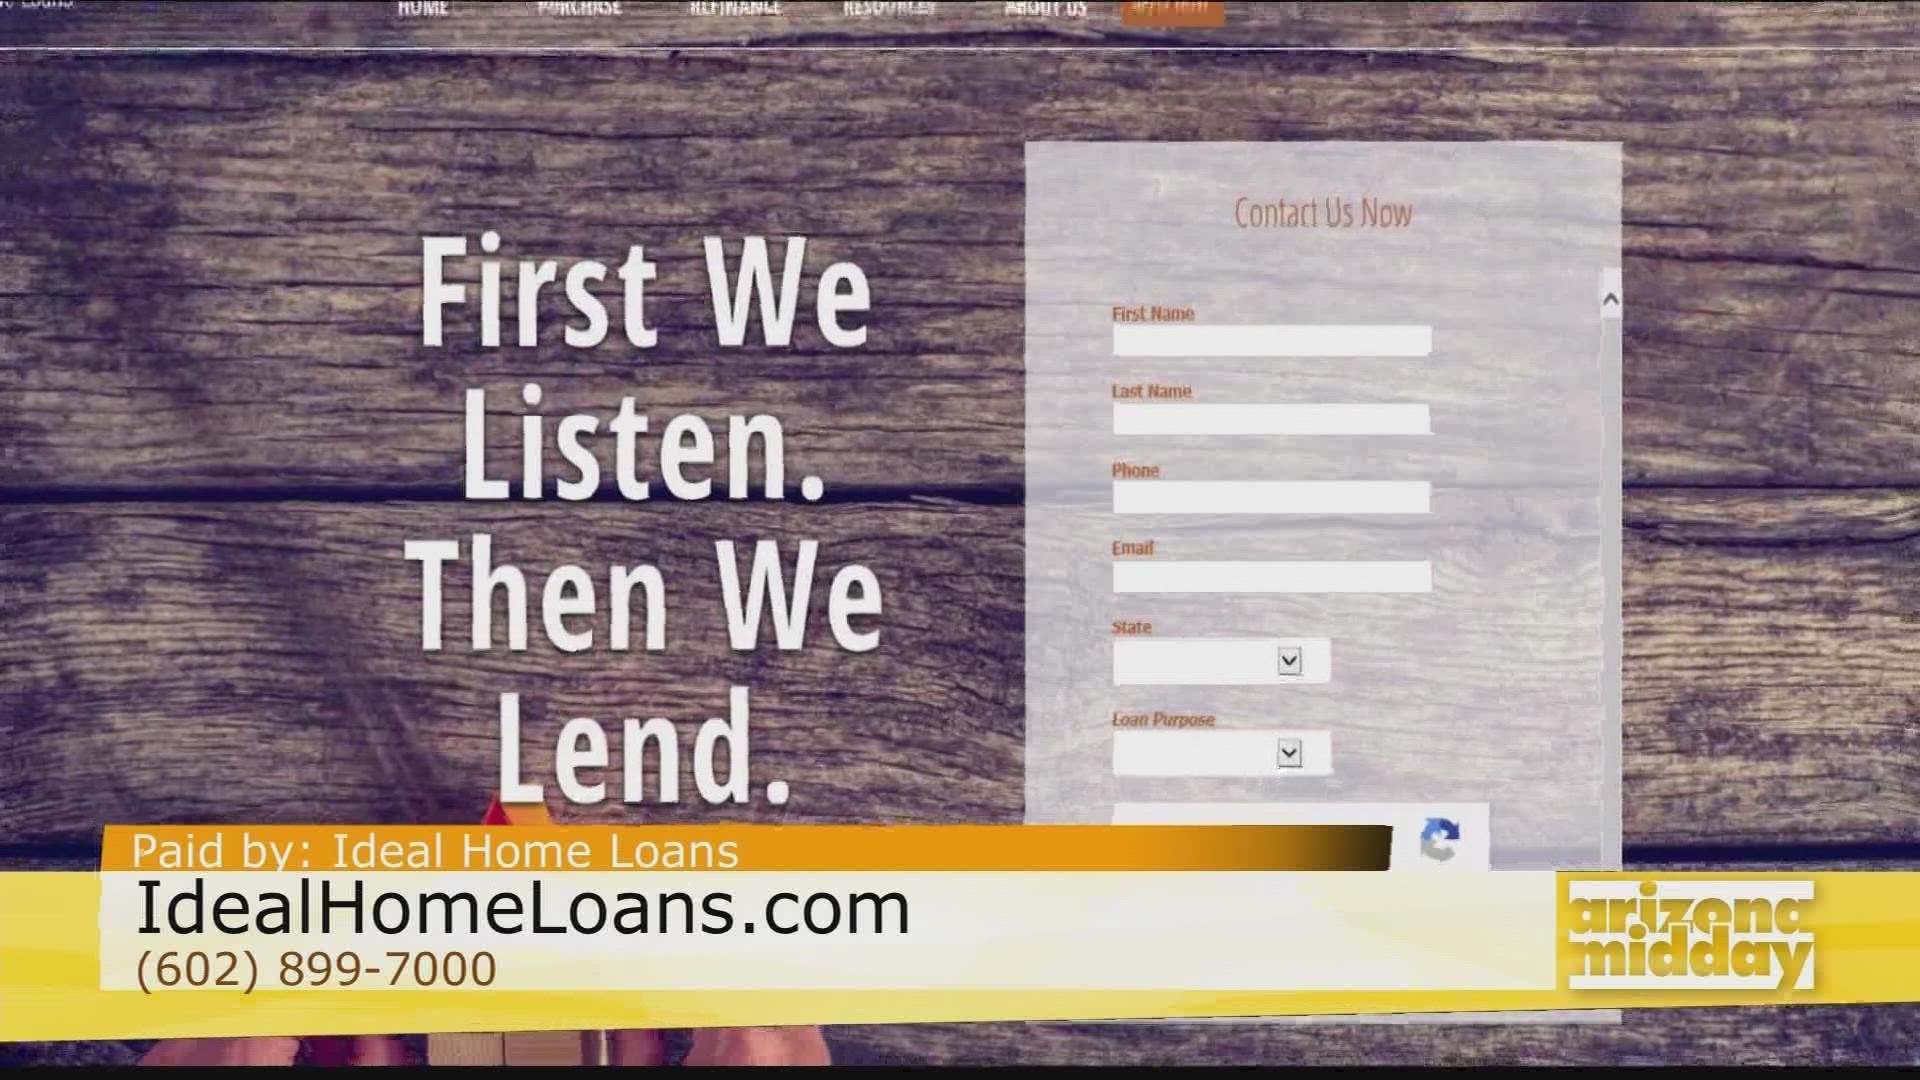 Brent Ivinson, Owner of Ideal Home Loans, shares his top tips on refinancing and more!